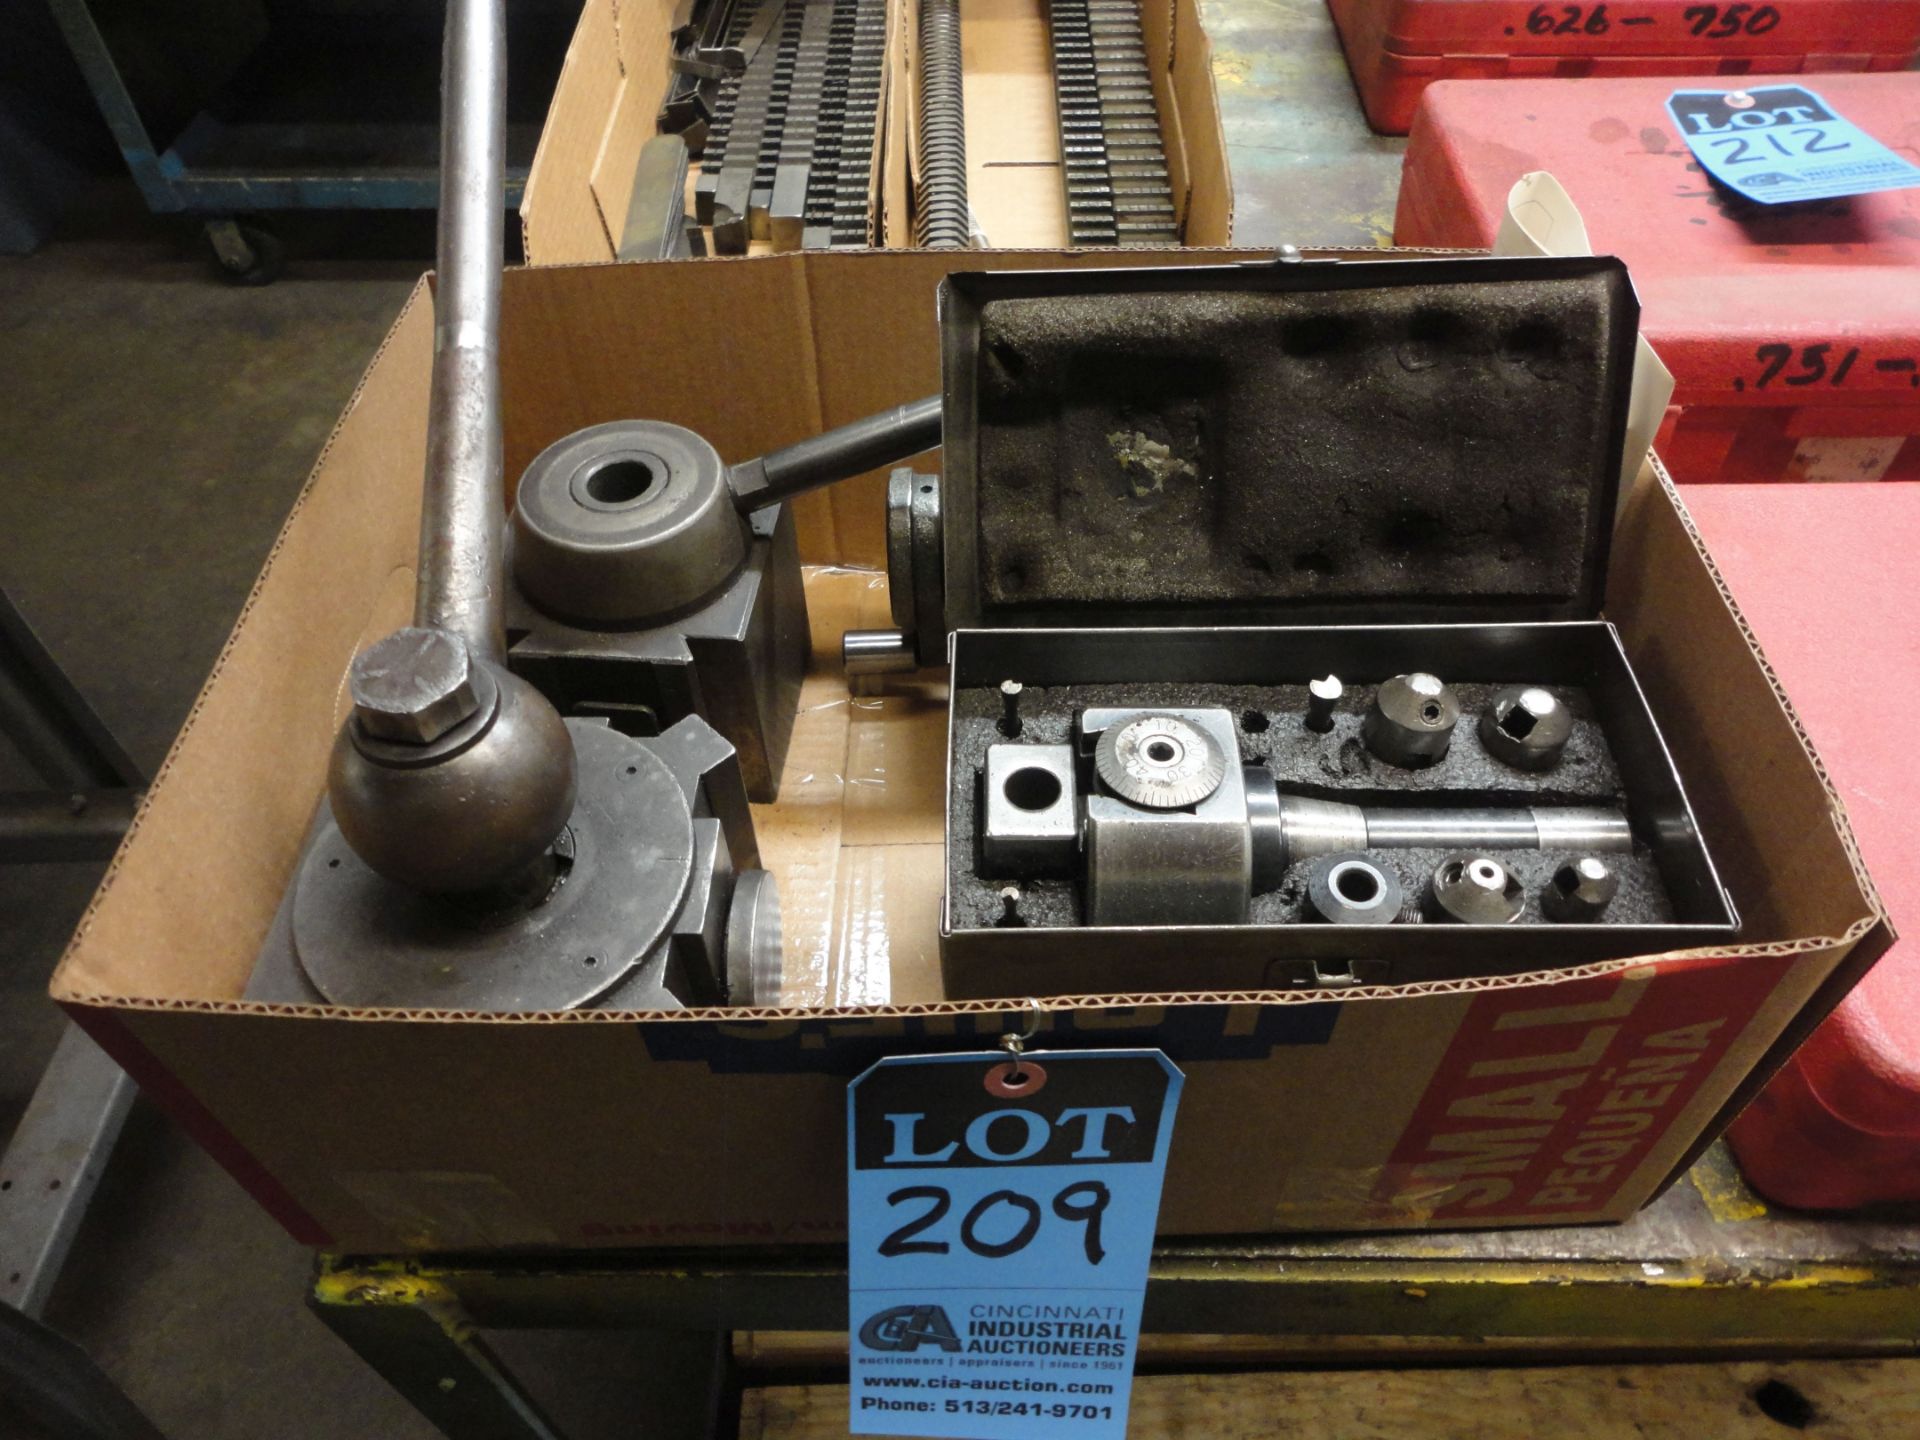 (LOT) 5-C SPIN FIXTURE, INDEXABLE BORING HEAD & LARGE QUICK CHANGE TOOLHOLDER